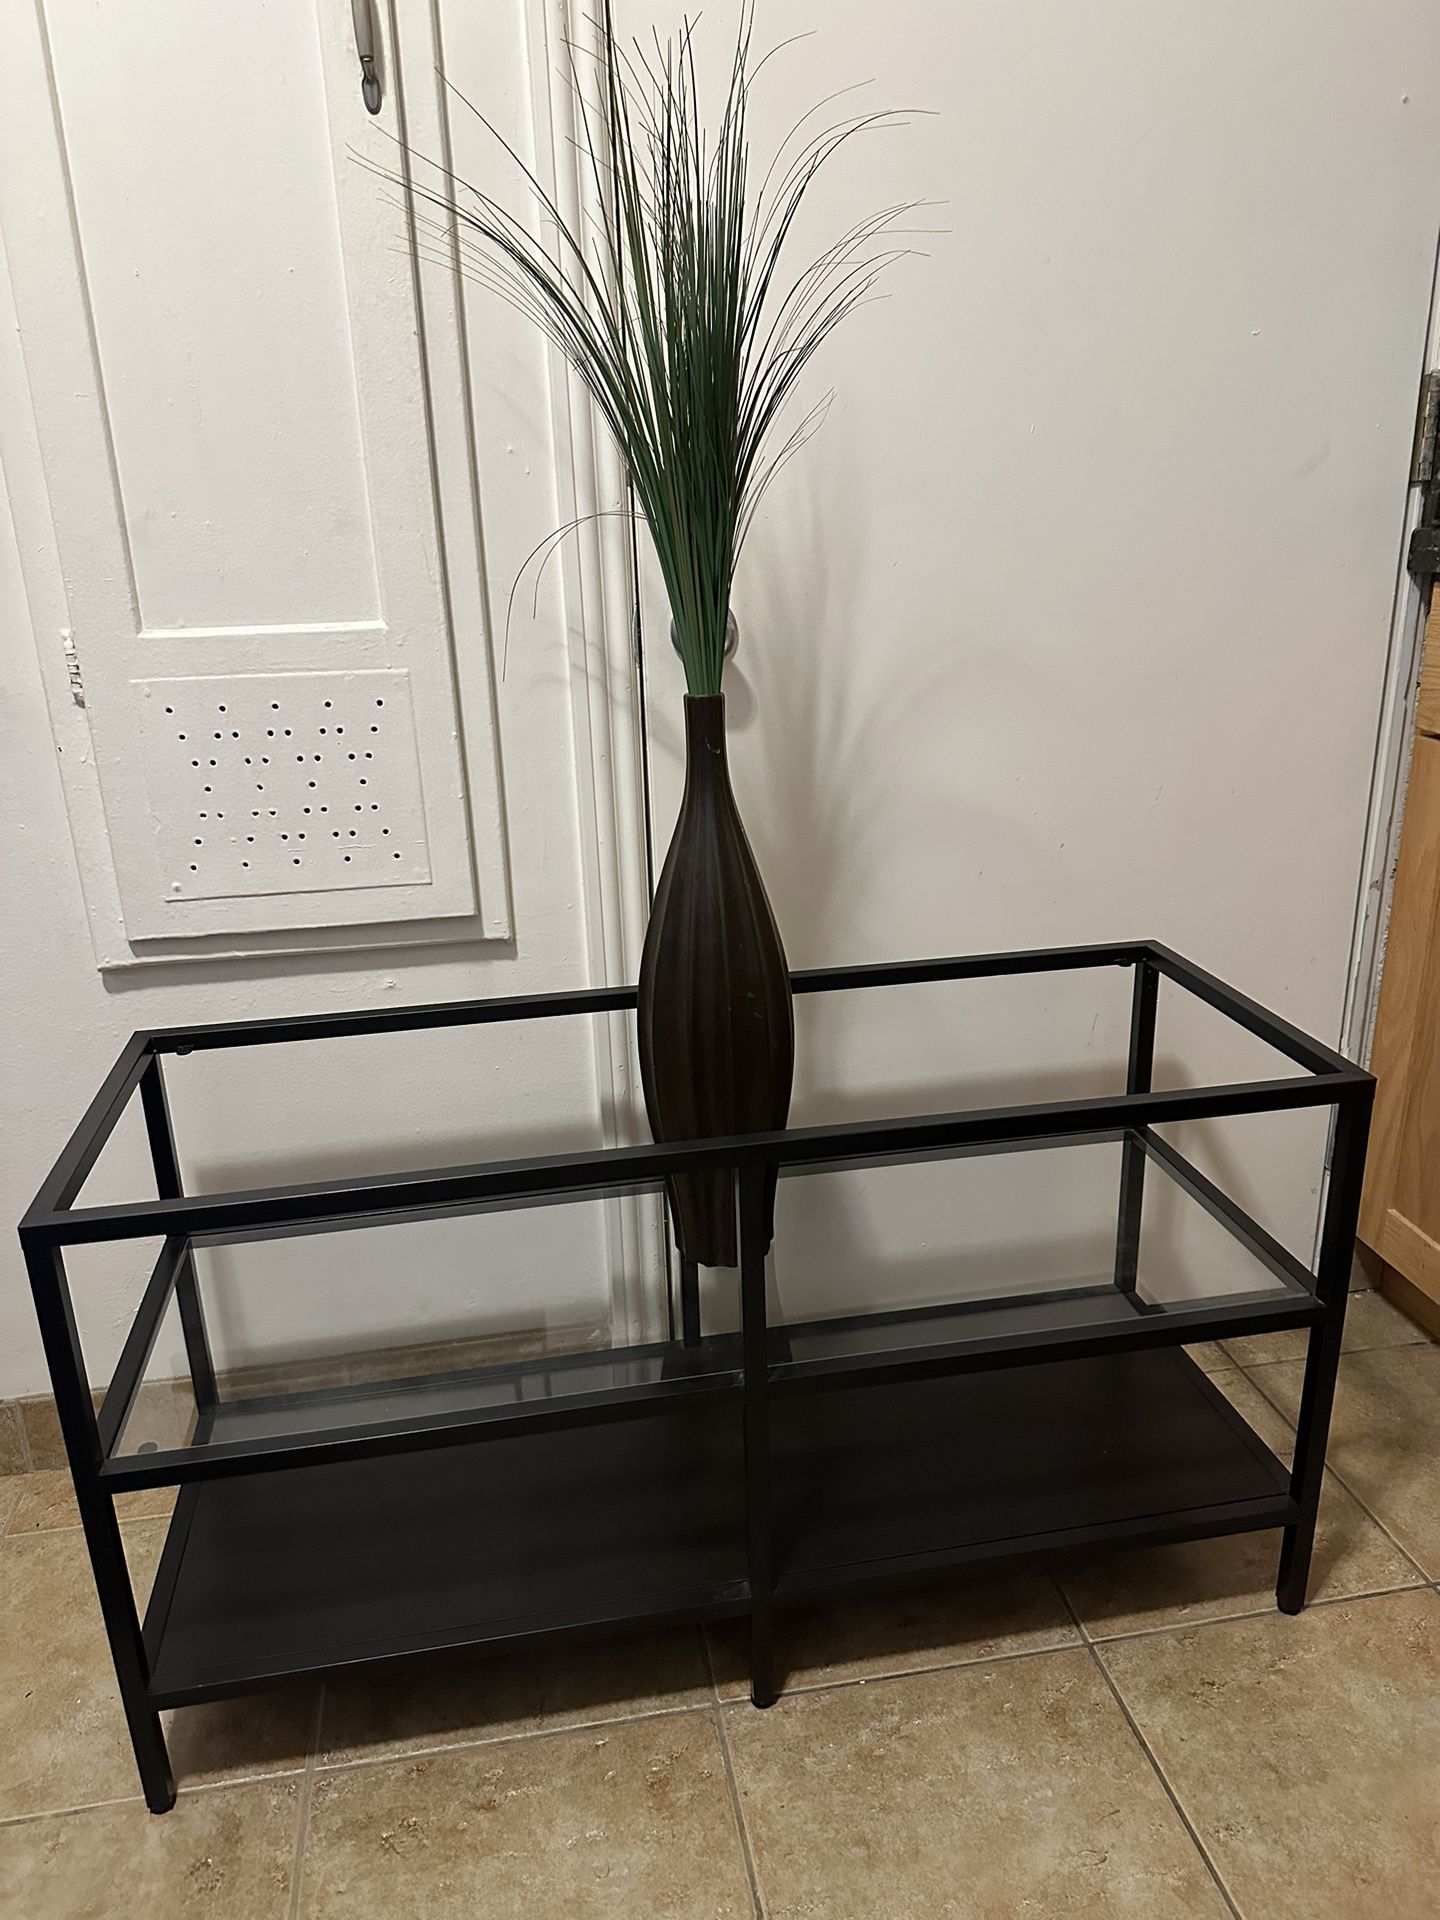 Table With Glass Shelf